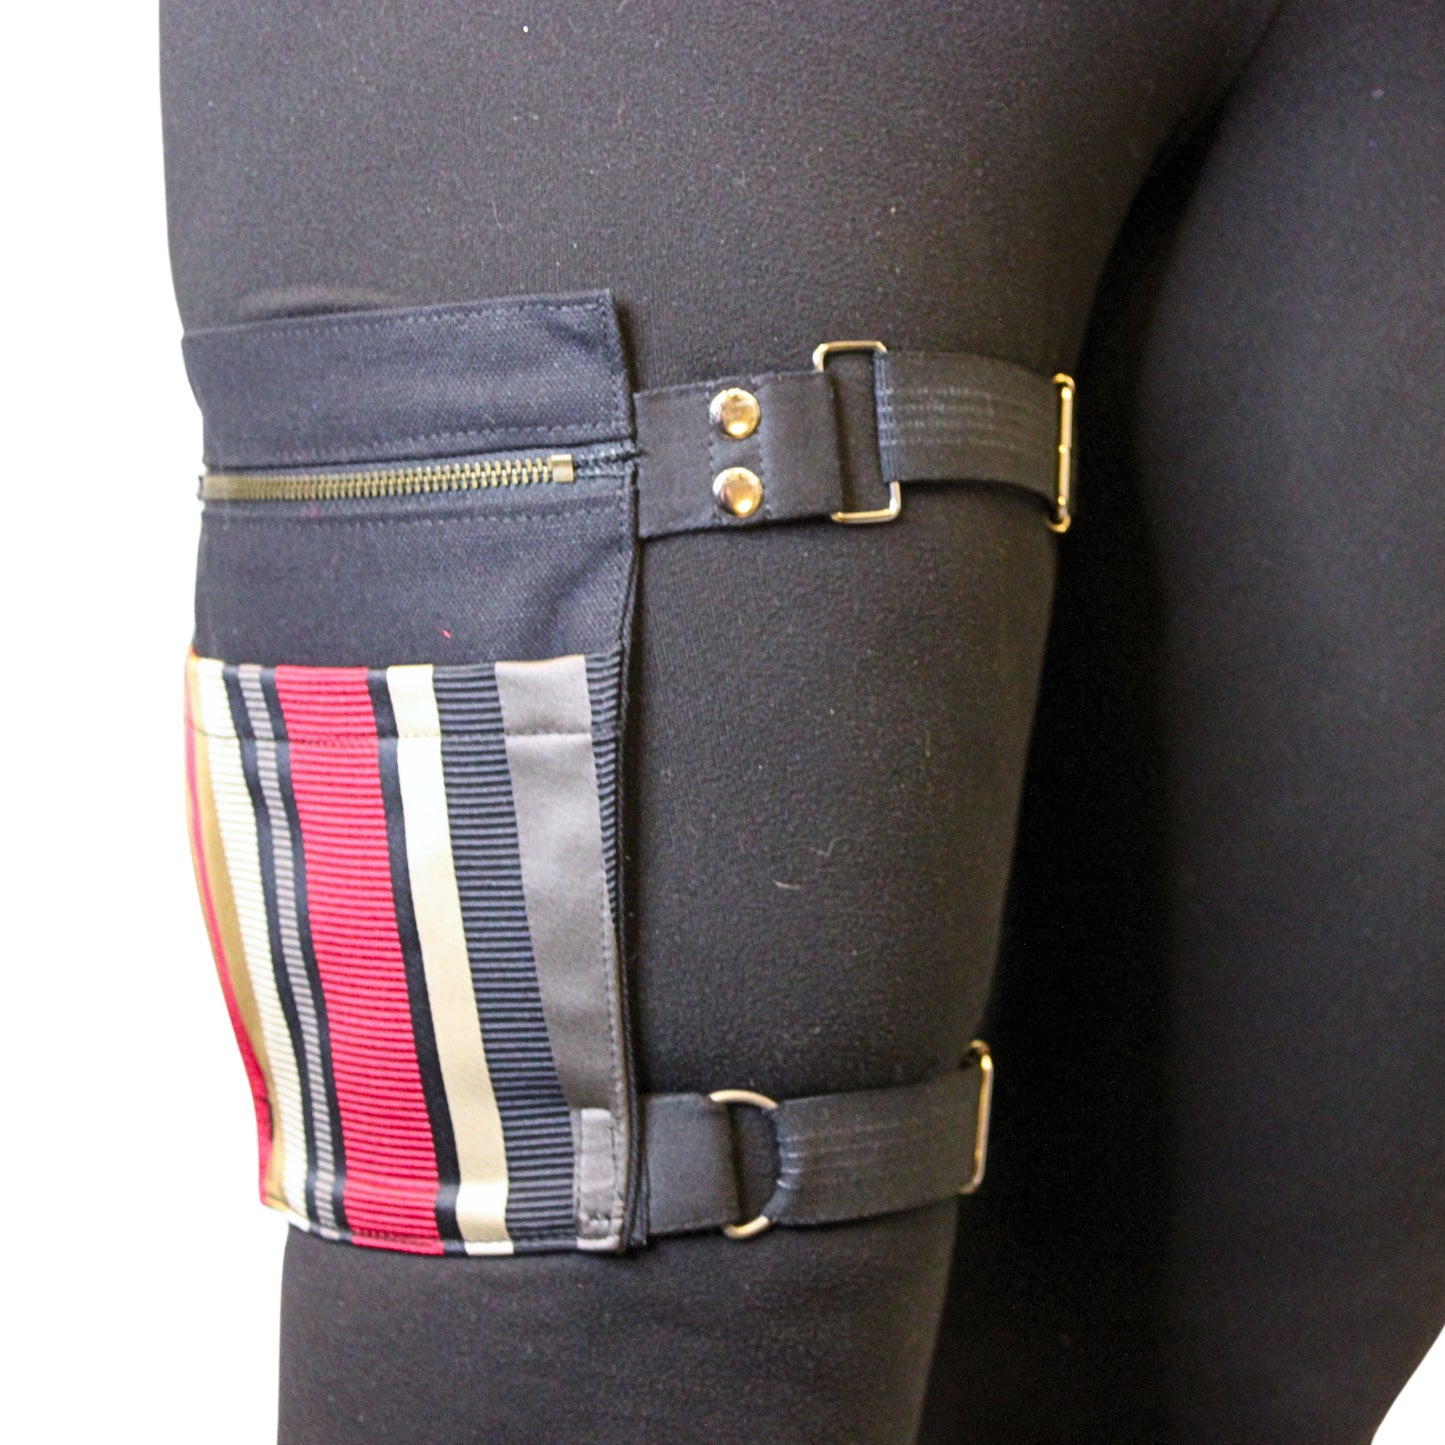 The VM Double Strap Thigh Holster